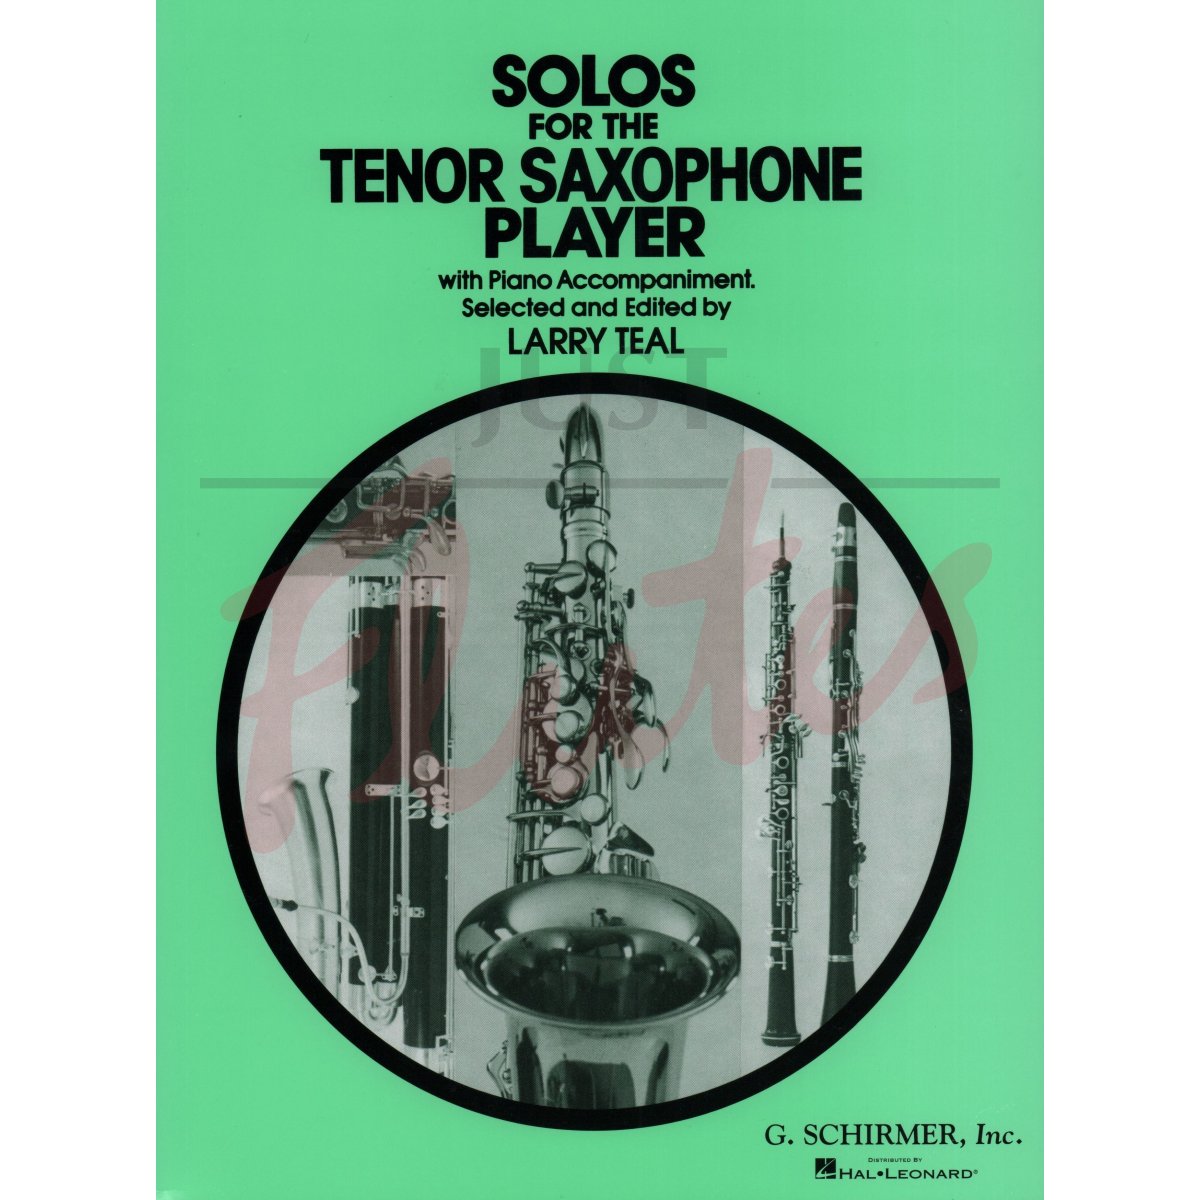 Solos for the Tenor Saxophone Player with Piano Accompaniment